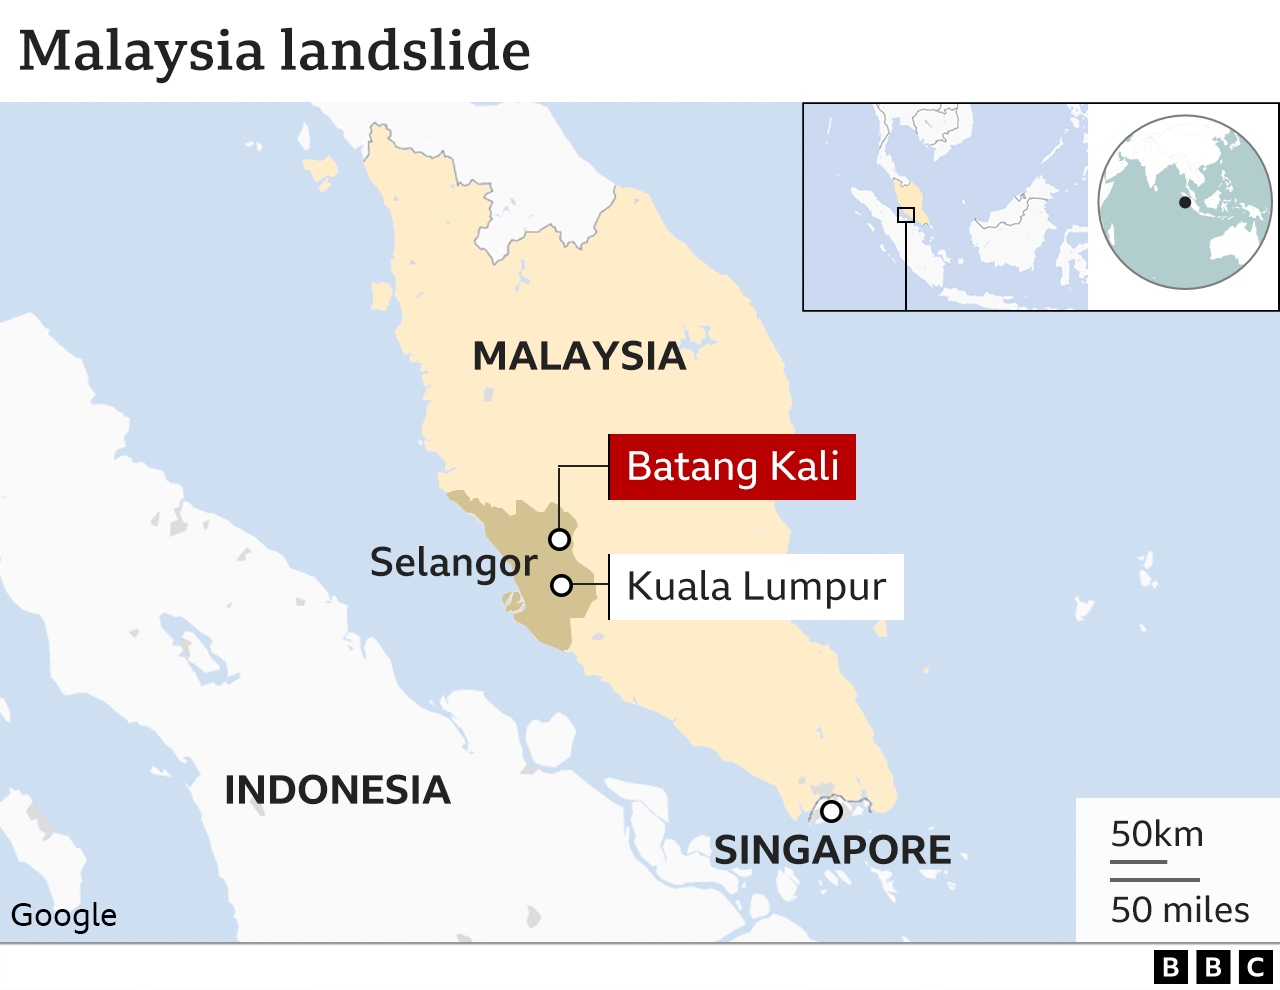 Map showing the location of the landslide in Malaysia.